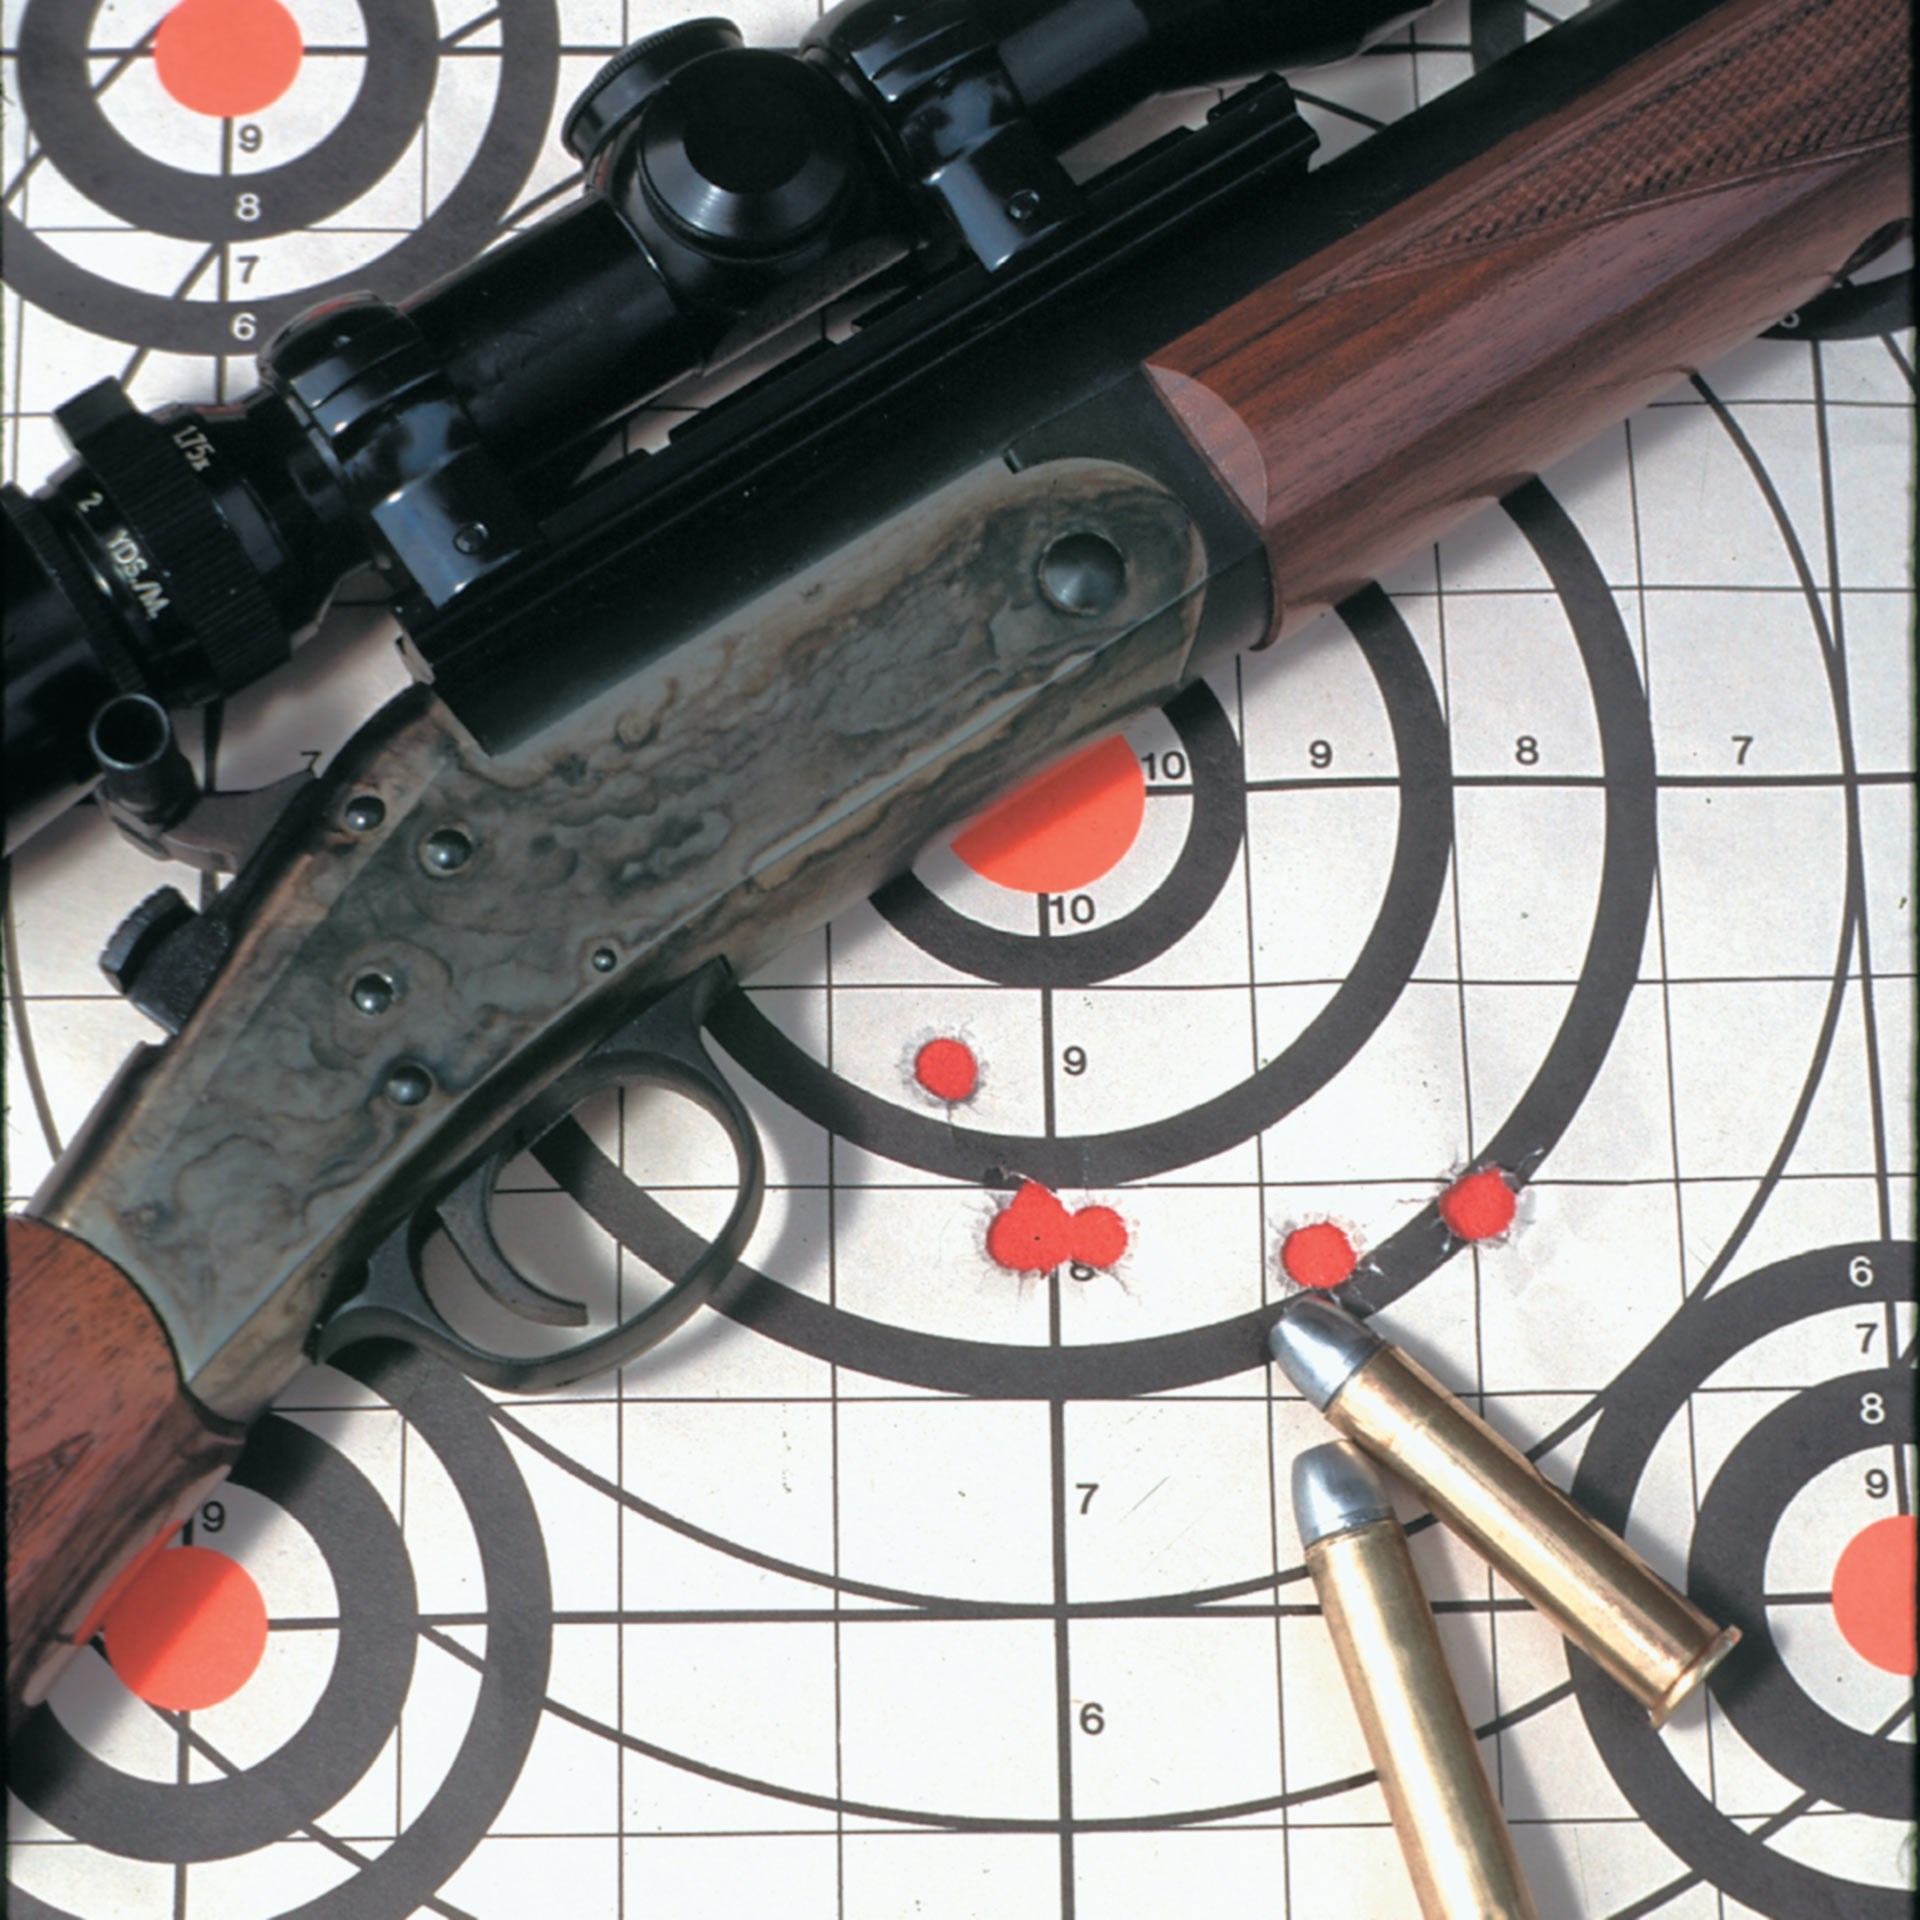 rifle on target with groups and ammo